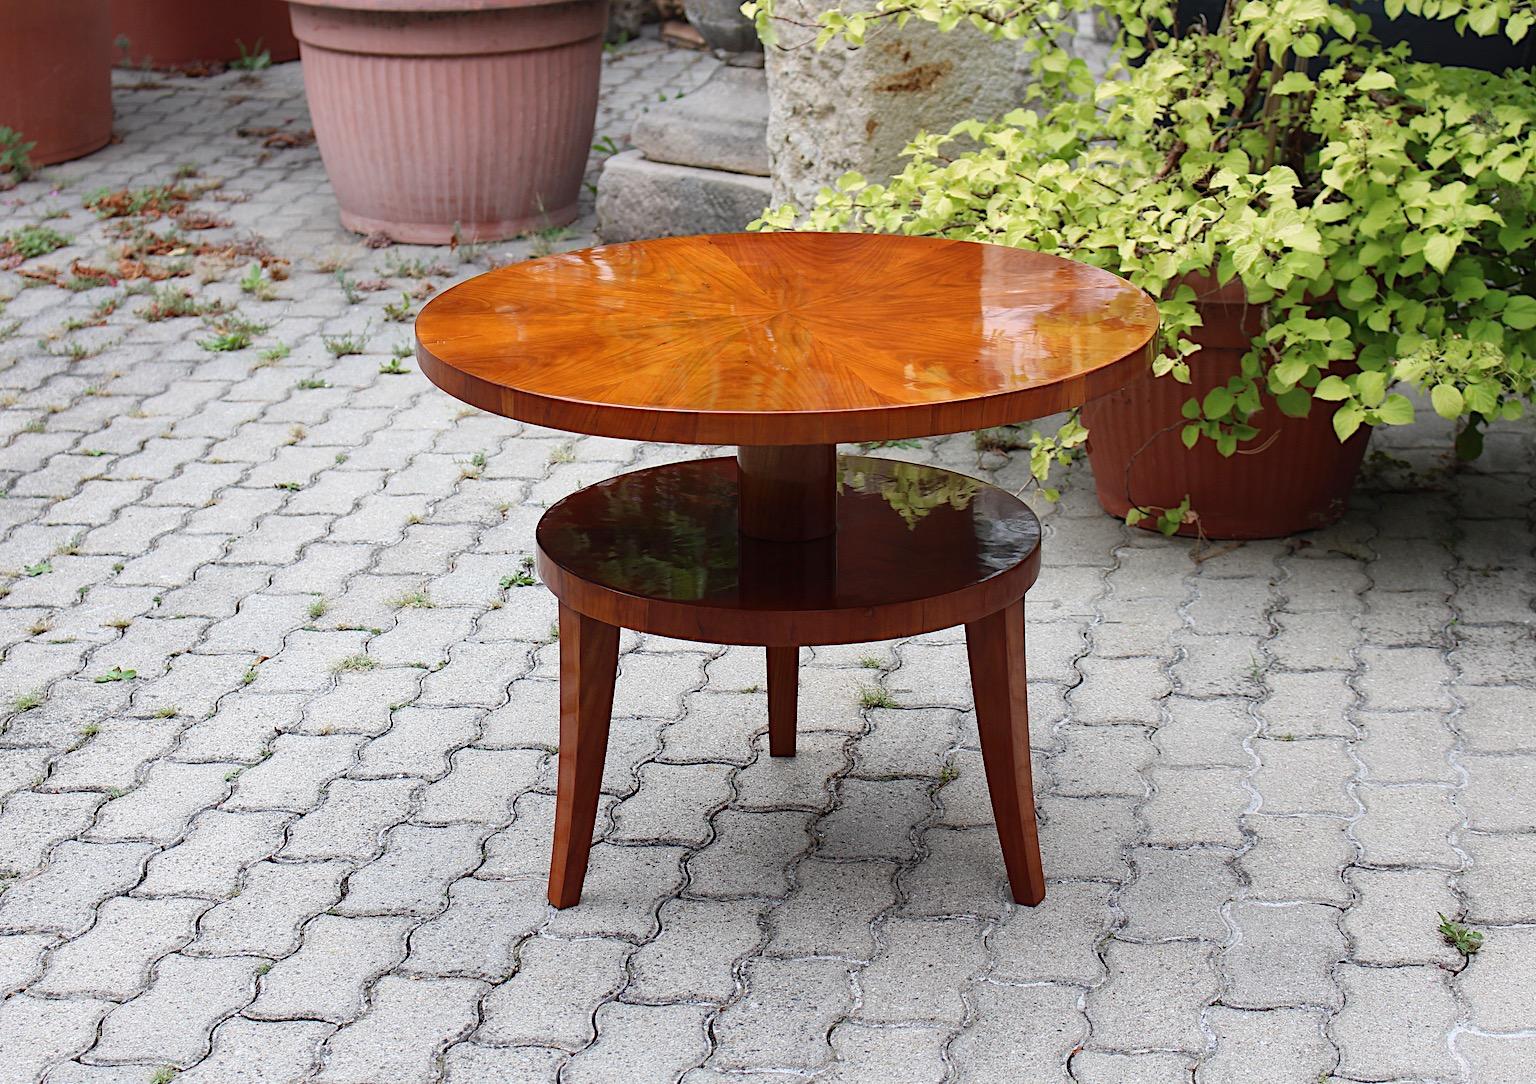 Art Deco Vintage circular like cherry side table or coffee table attributed to Ludwig Schmitt circa 1925 Austria.
A stunning three legged and two tiered side table of coffee table from
cherry wood attributed to the manufacturer Ludwig Schmitt circa